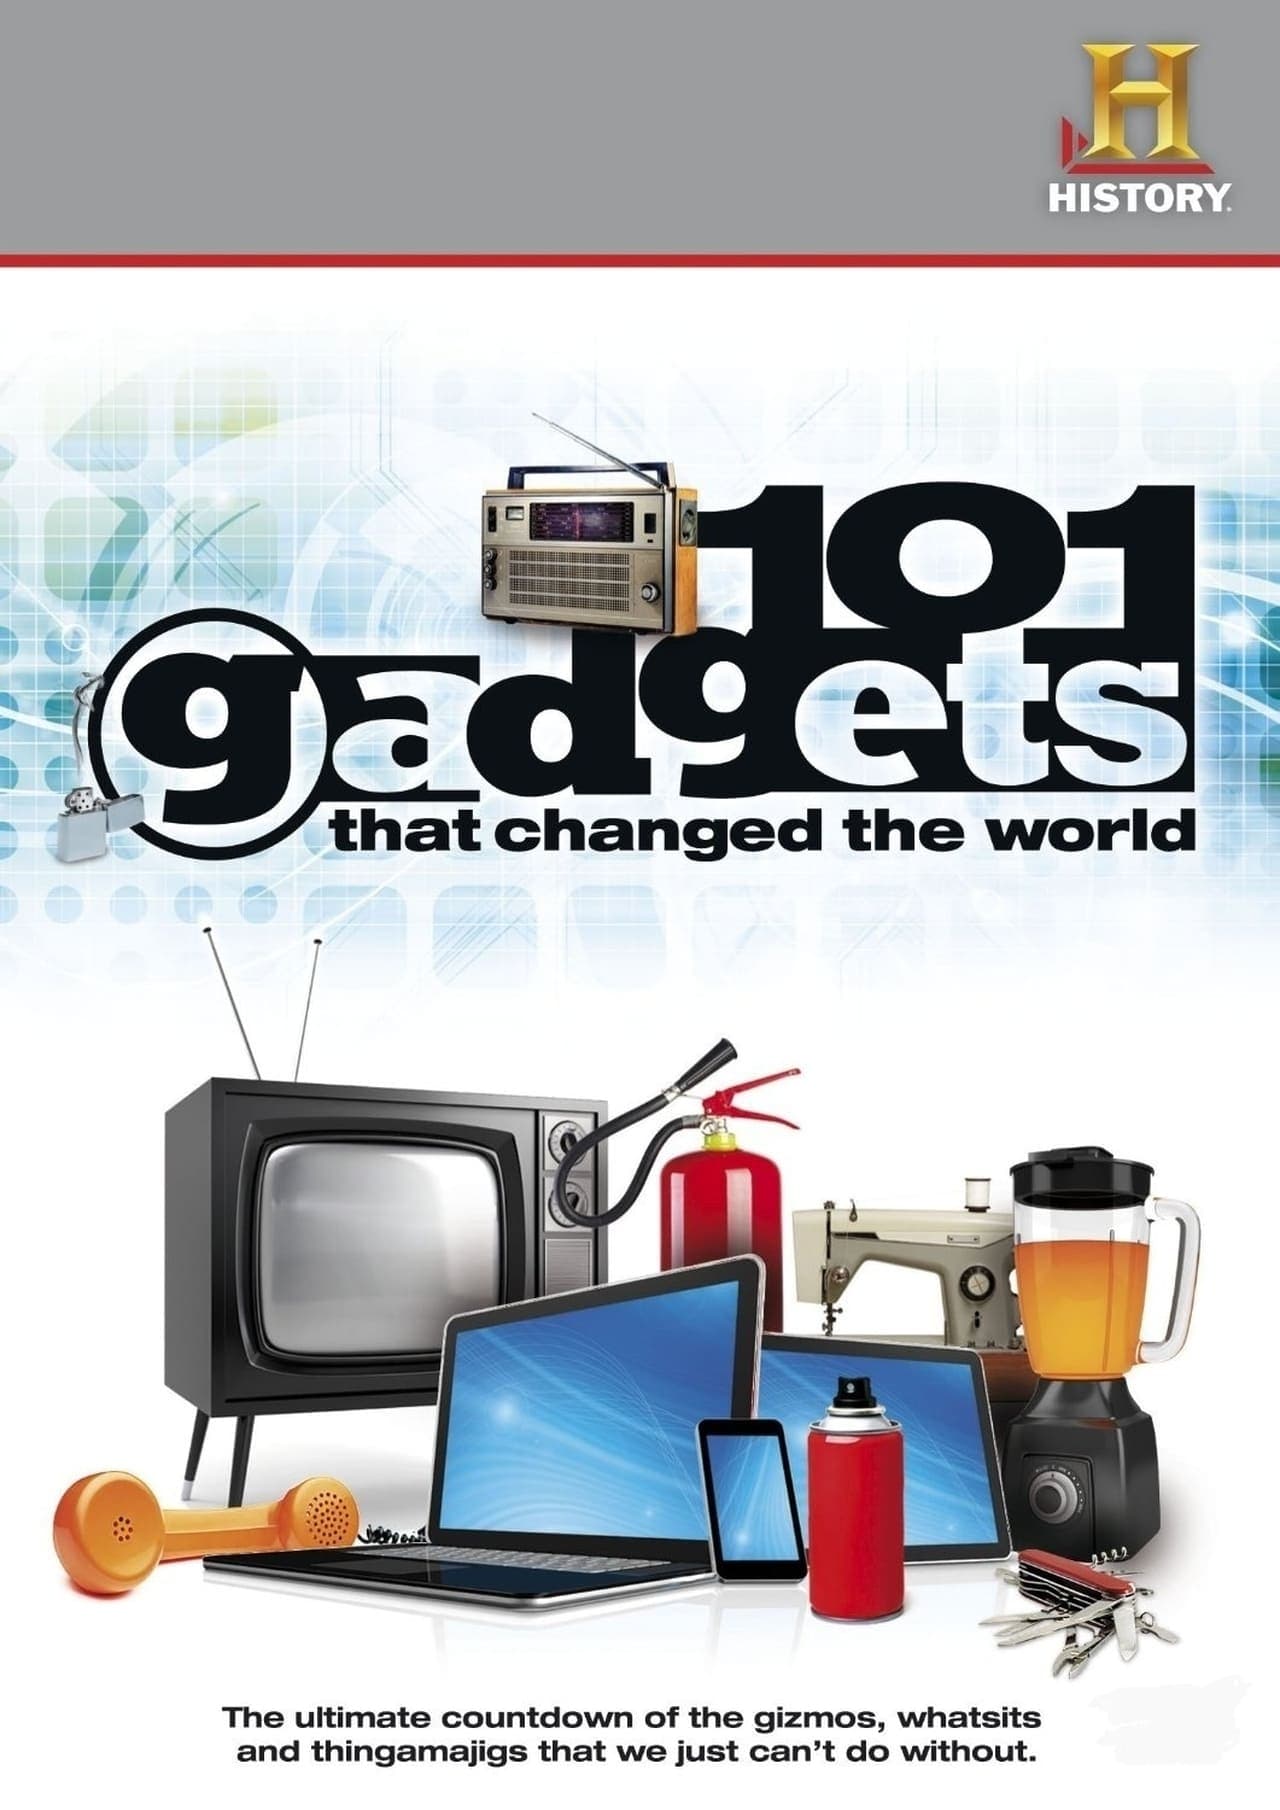 101 Gadgets That Changed the World